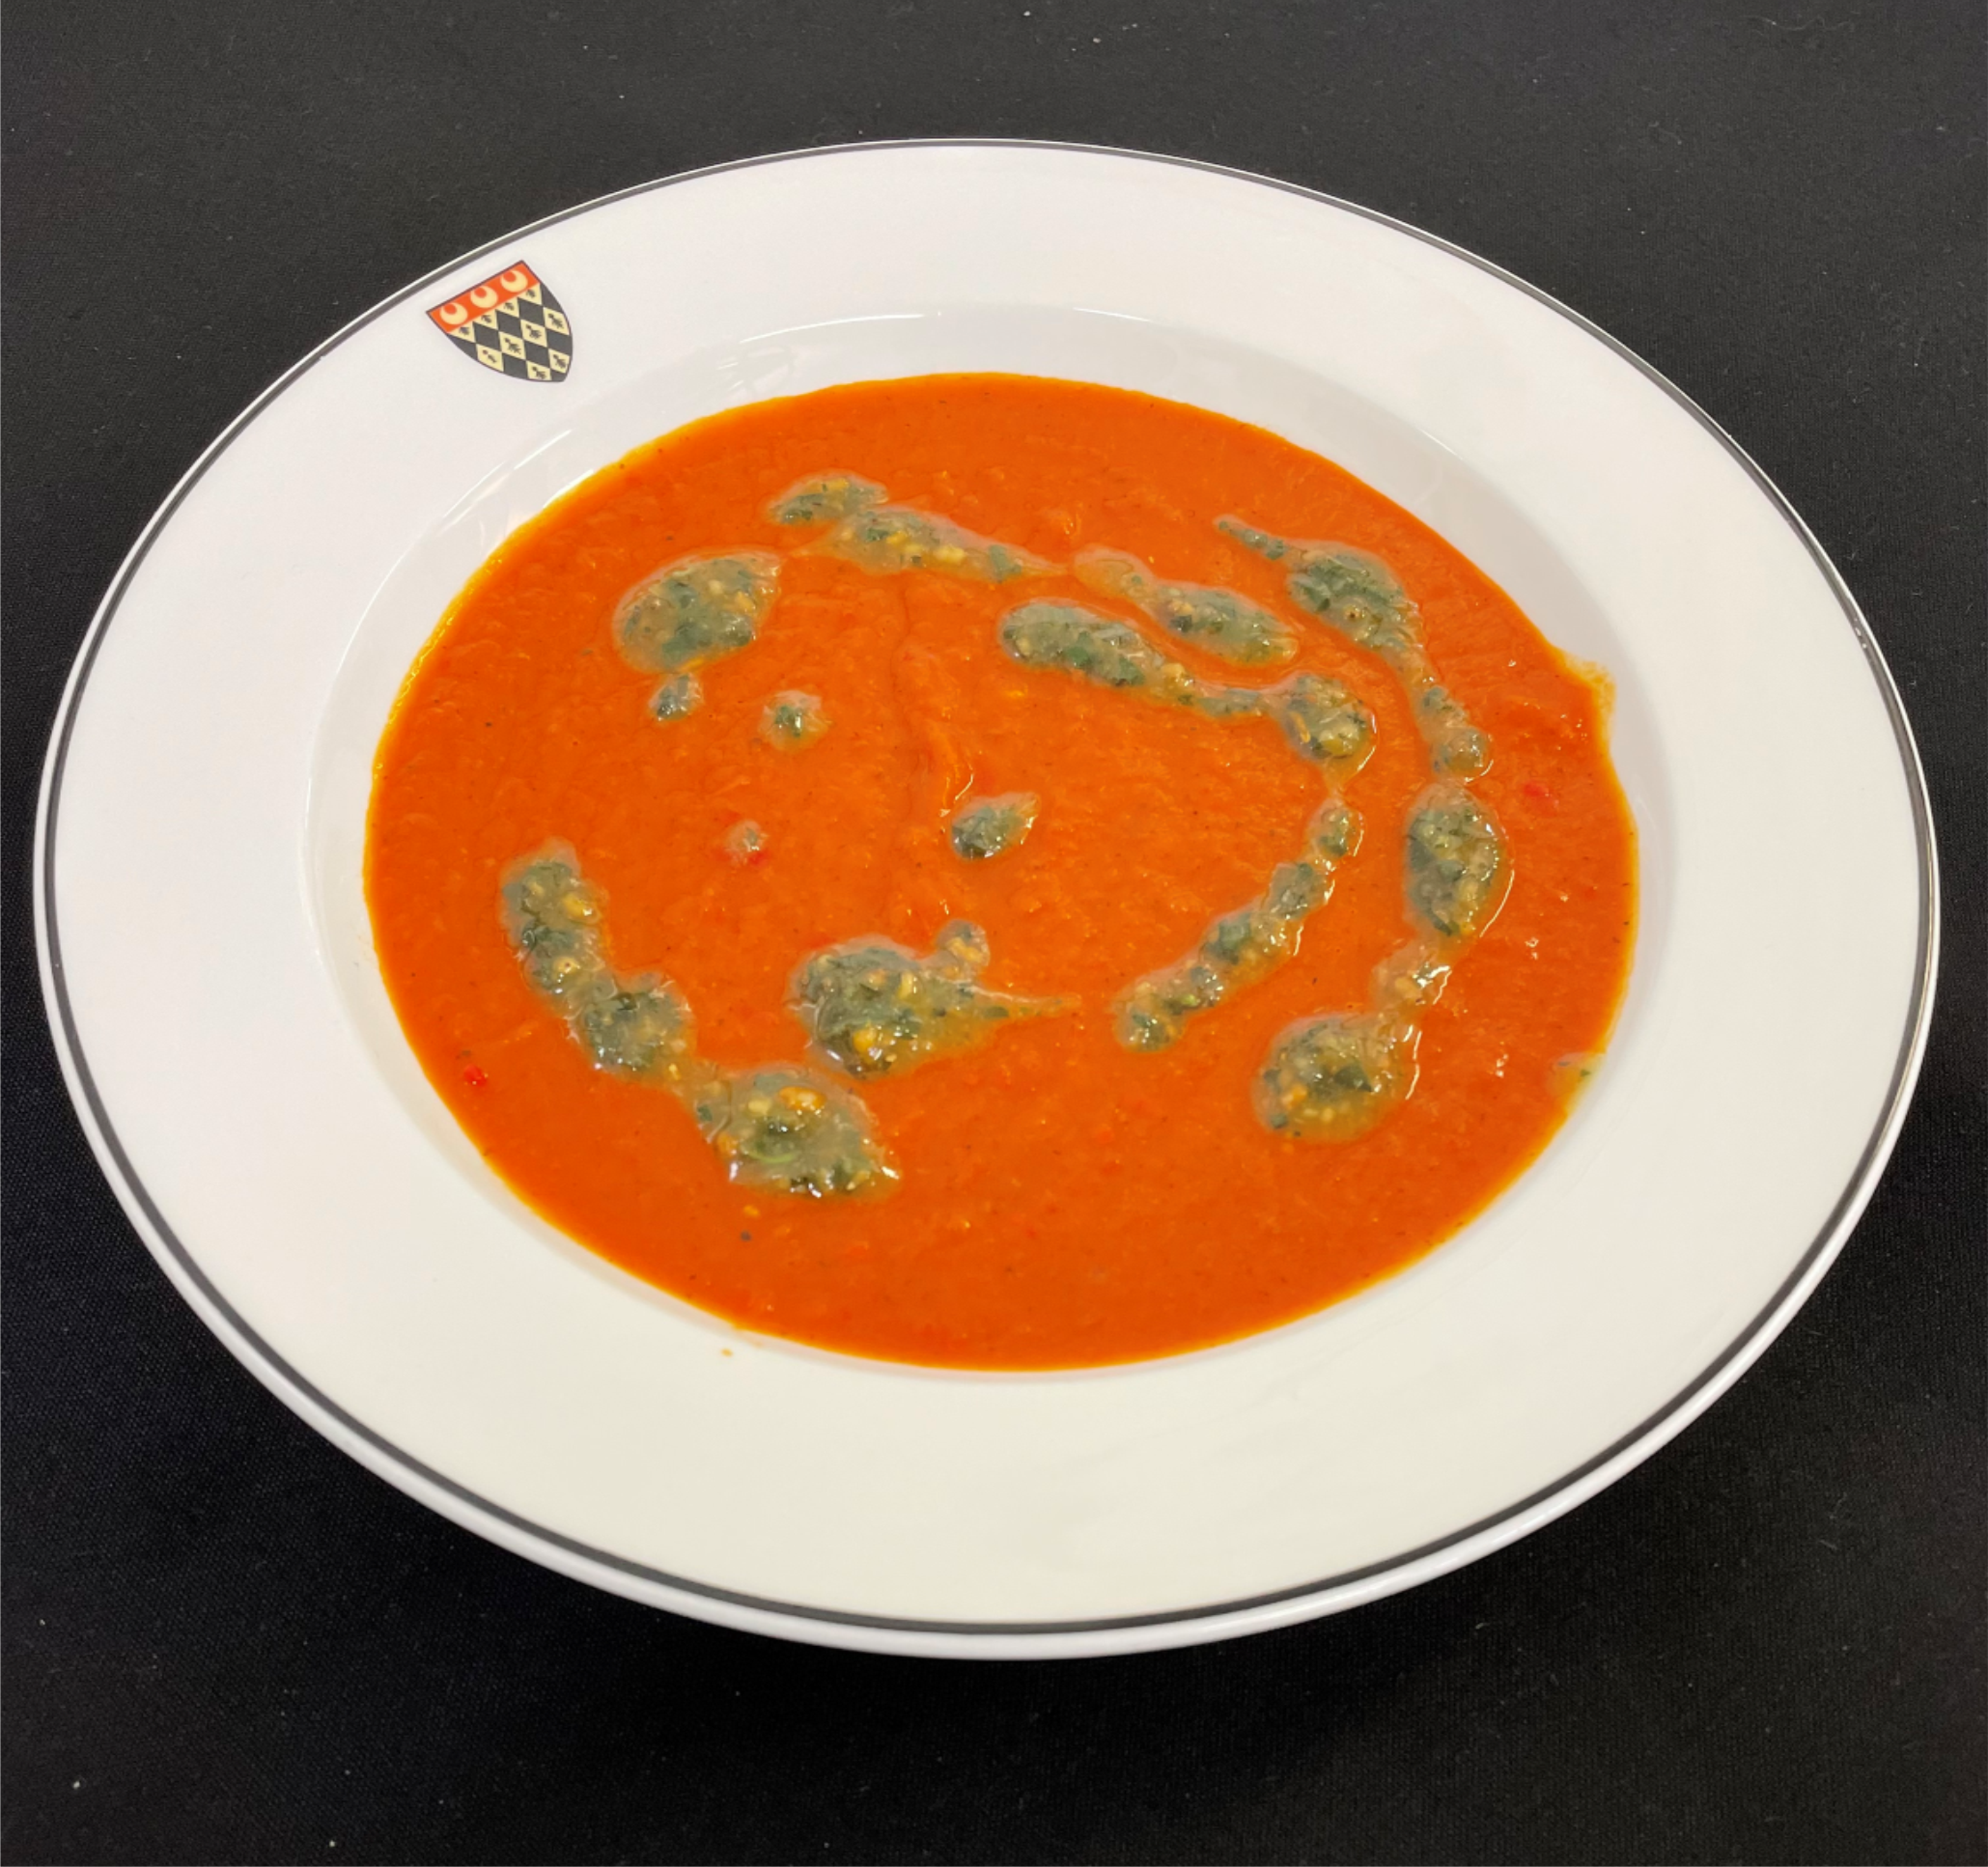 Red pepper and tomato soup (vg): served with a vegan pesto